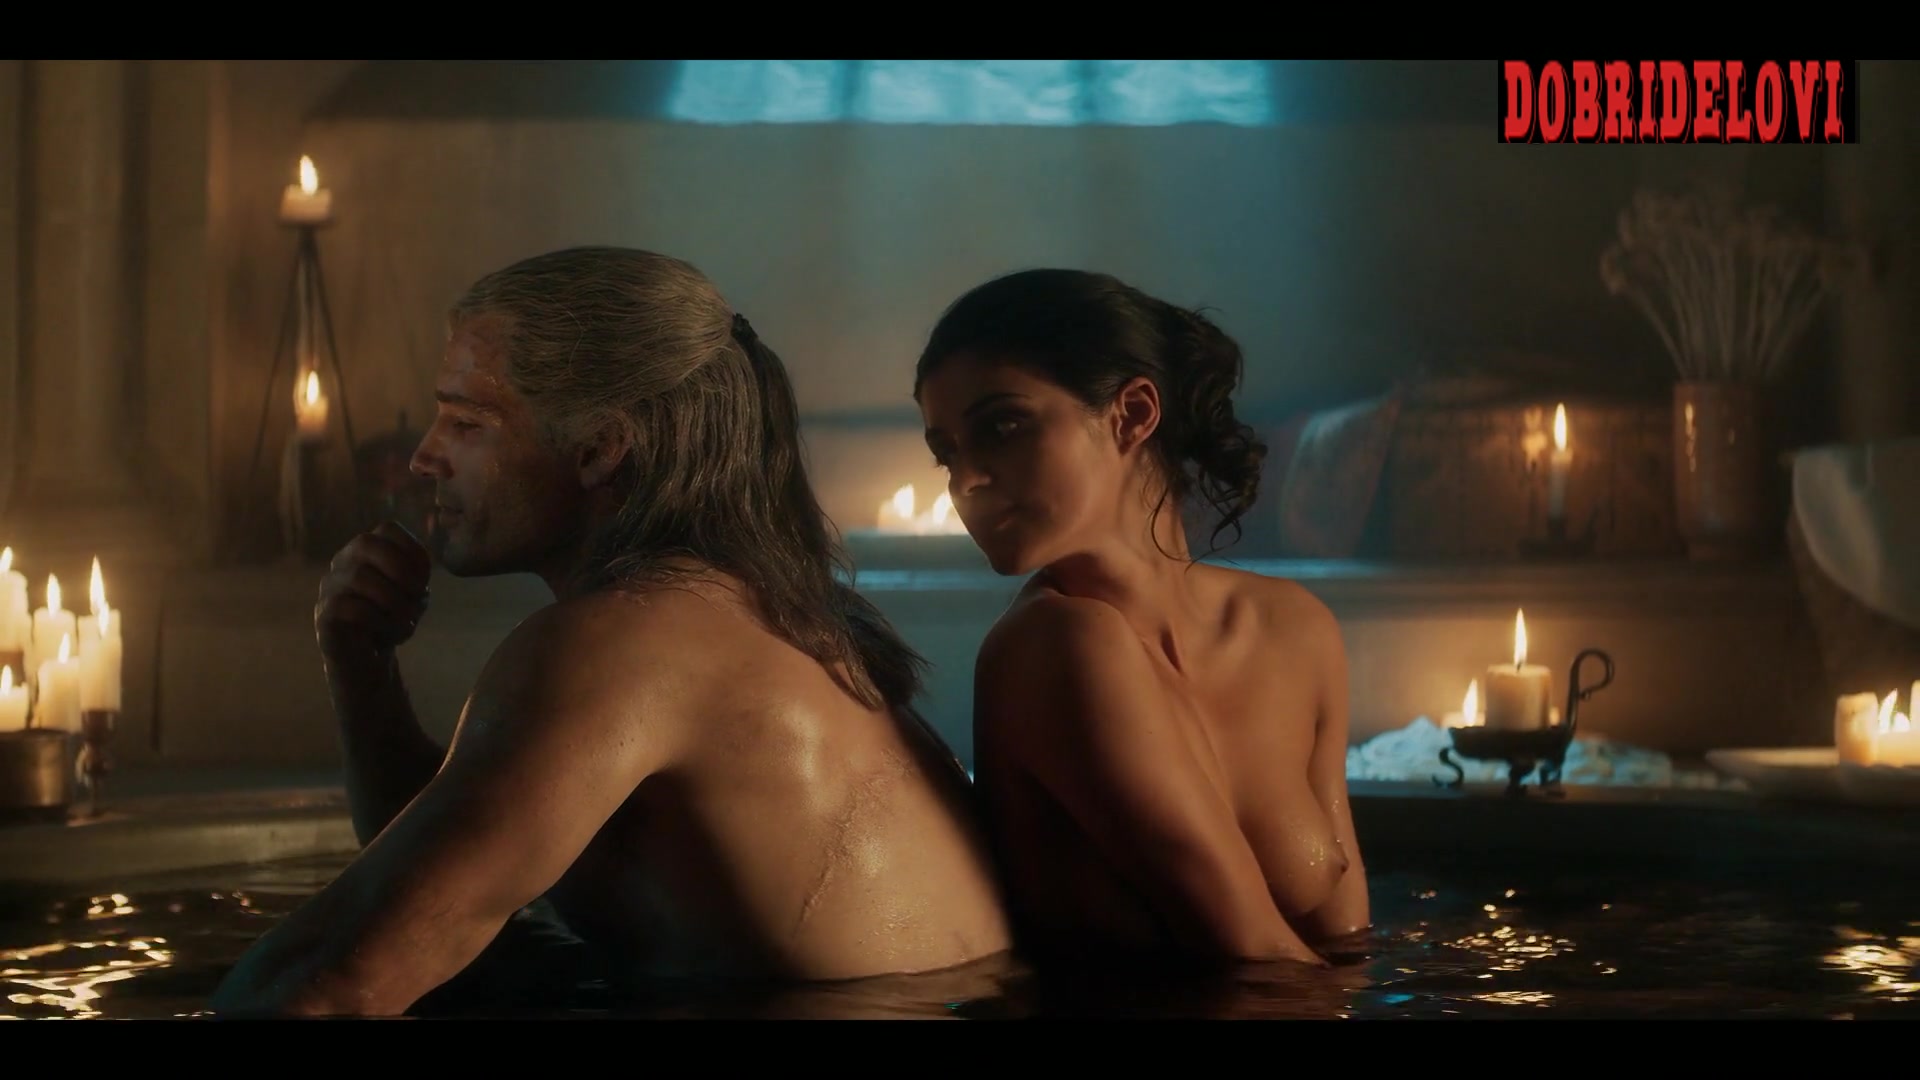 Anya Chalotra strips and joins Henry Cavill in the tub